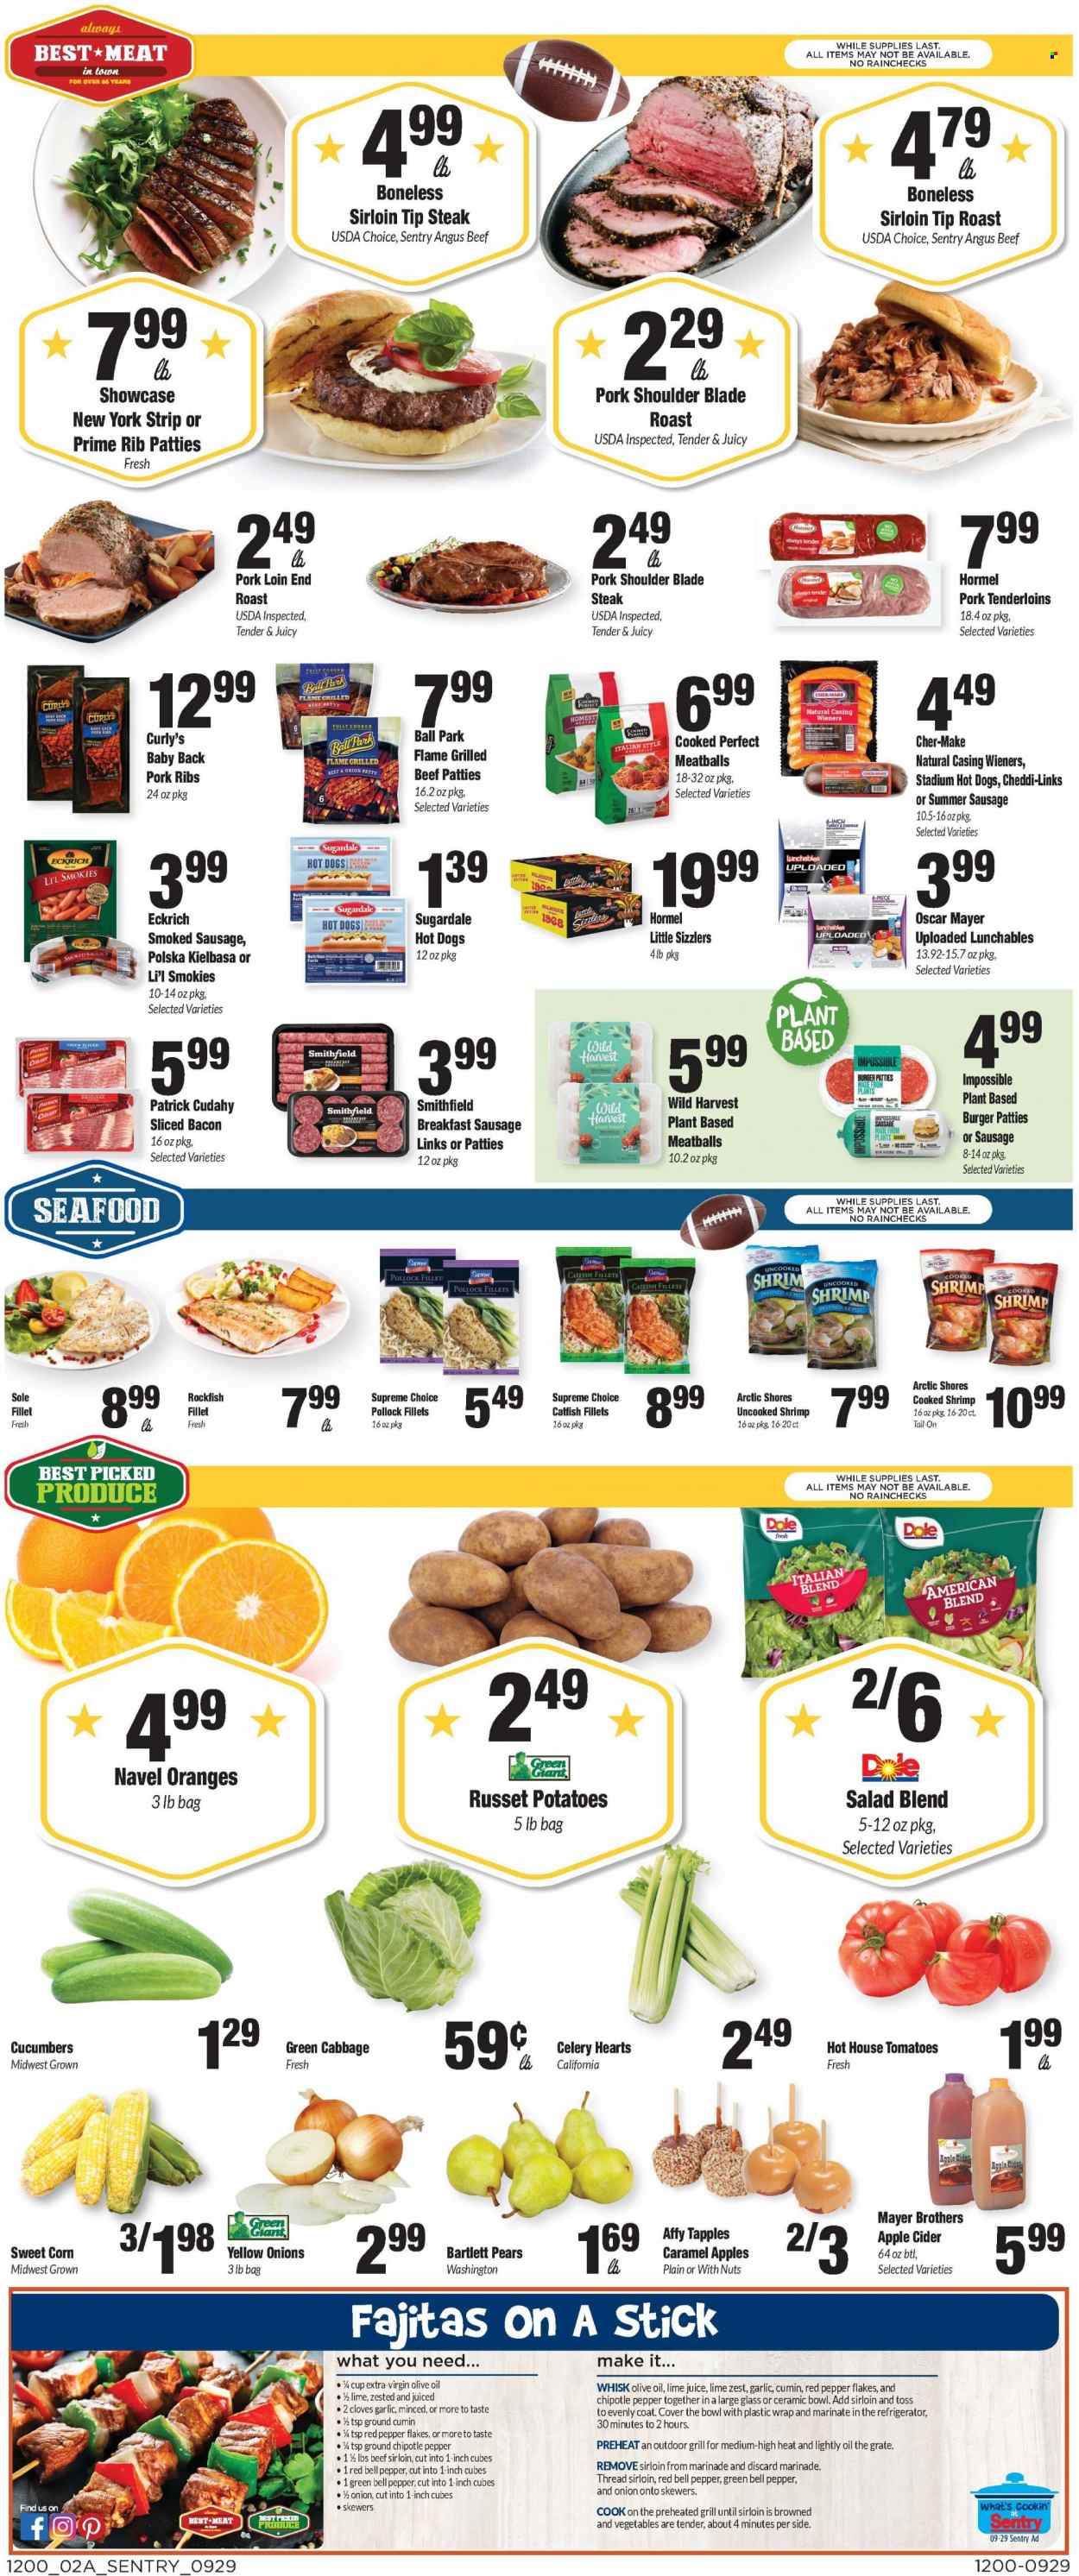 thumbnail - Sentry Foods Flyer - 09/29/2022 - 10/05/2022 - Sales products - bell peppers, cabbage, celery, corn, cucumber, garlic, russet potatoes, tomatoes, potatoes, salad, Dole, sweet corn, Wild Harvest, sleeved celery, Bartlett pears, pears, oranges, catfish, rockfish, pollock, seafood, shrimps, Arctic Shores, hot dog, meatballs, hamburger, fajita, Lunchables, Hormel, Sugardale, bacon, Oscar Mayer, sausage, smoked sausage, summer sausage, kielbasa, cheese, cloves, cumin, caramel, marinade, olive oil, oil, apple cider, bourbon, BROTHERS, cider, beef meat, beef sirloin, steak, burger patties, pork loin, pork meat, pork ribs, pork shoulder, pork tenderloin, pork back ribs, navel oranges. Page 2.